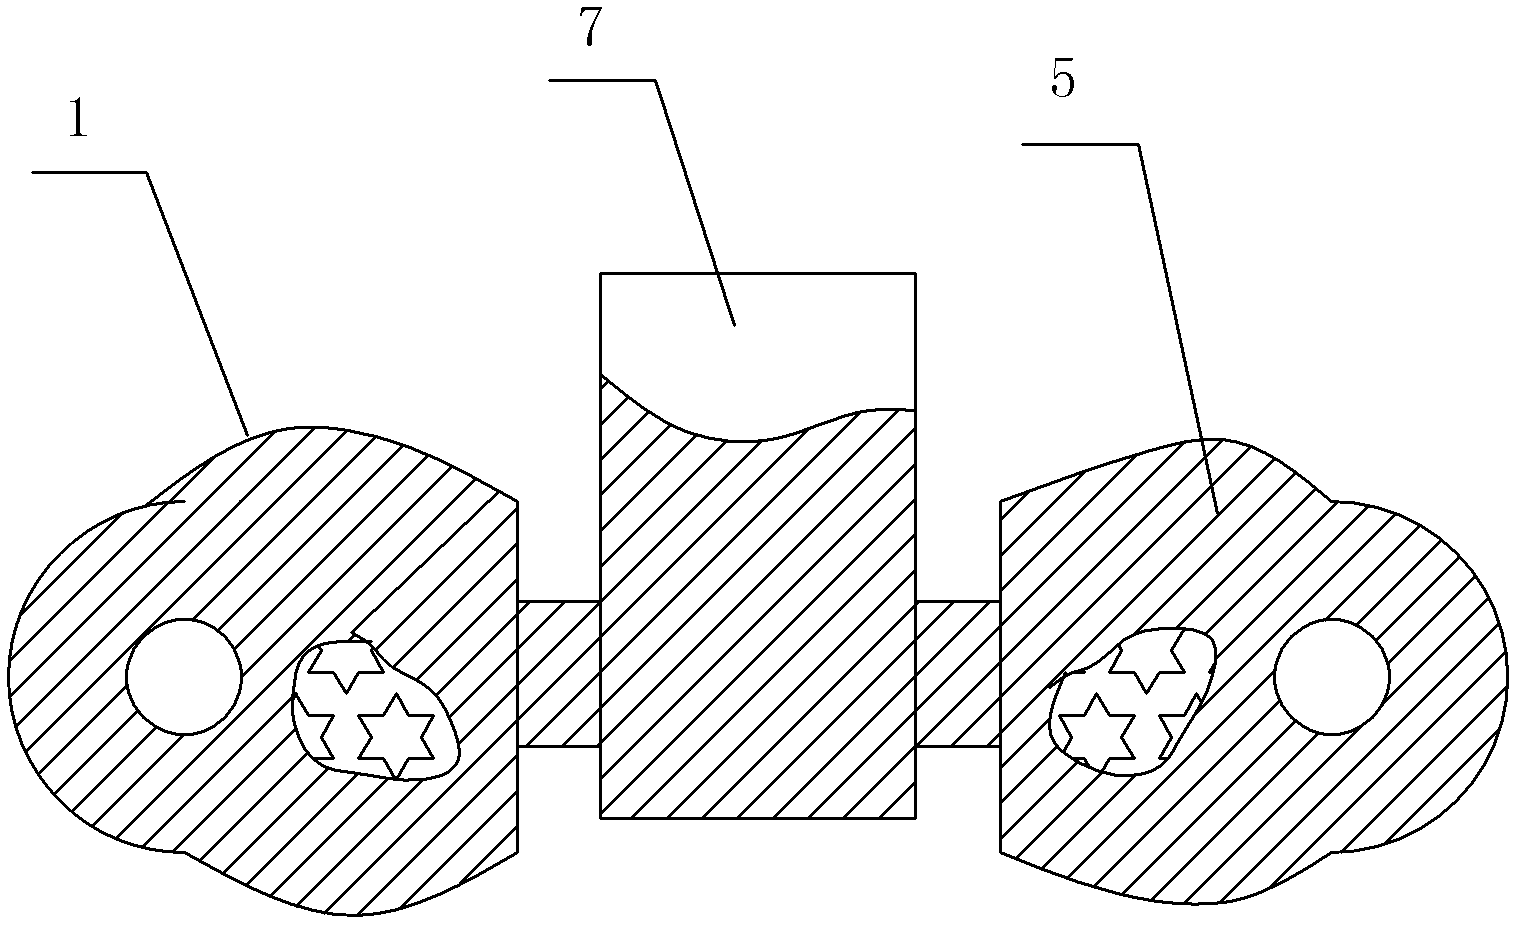 A centrifugal pouring method for water glass investment casting